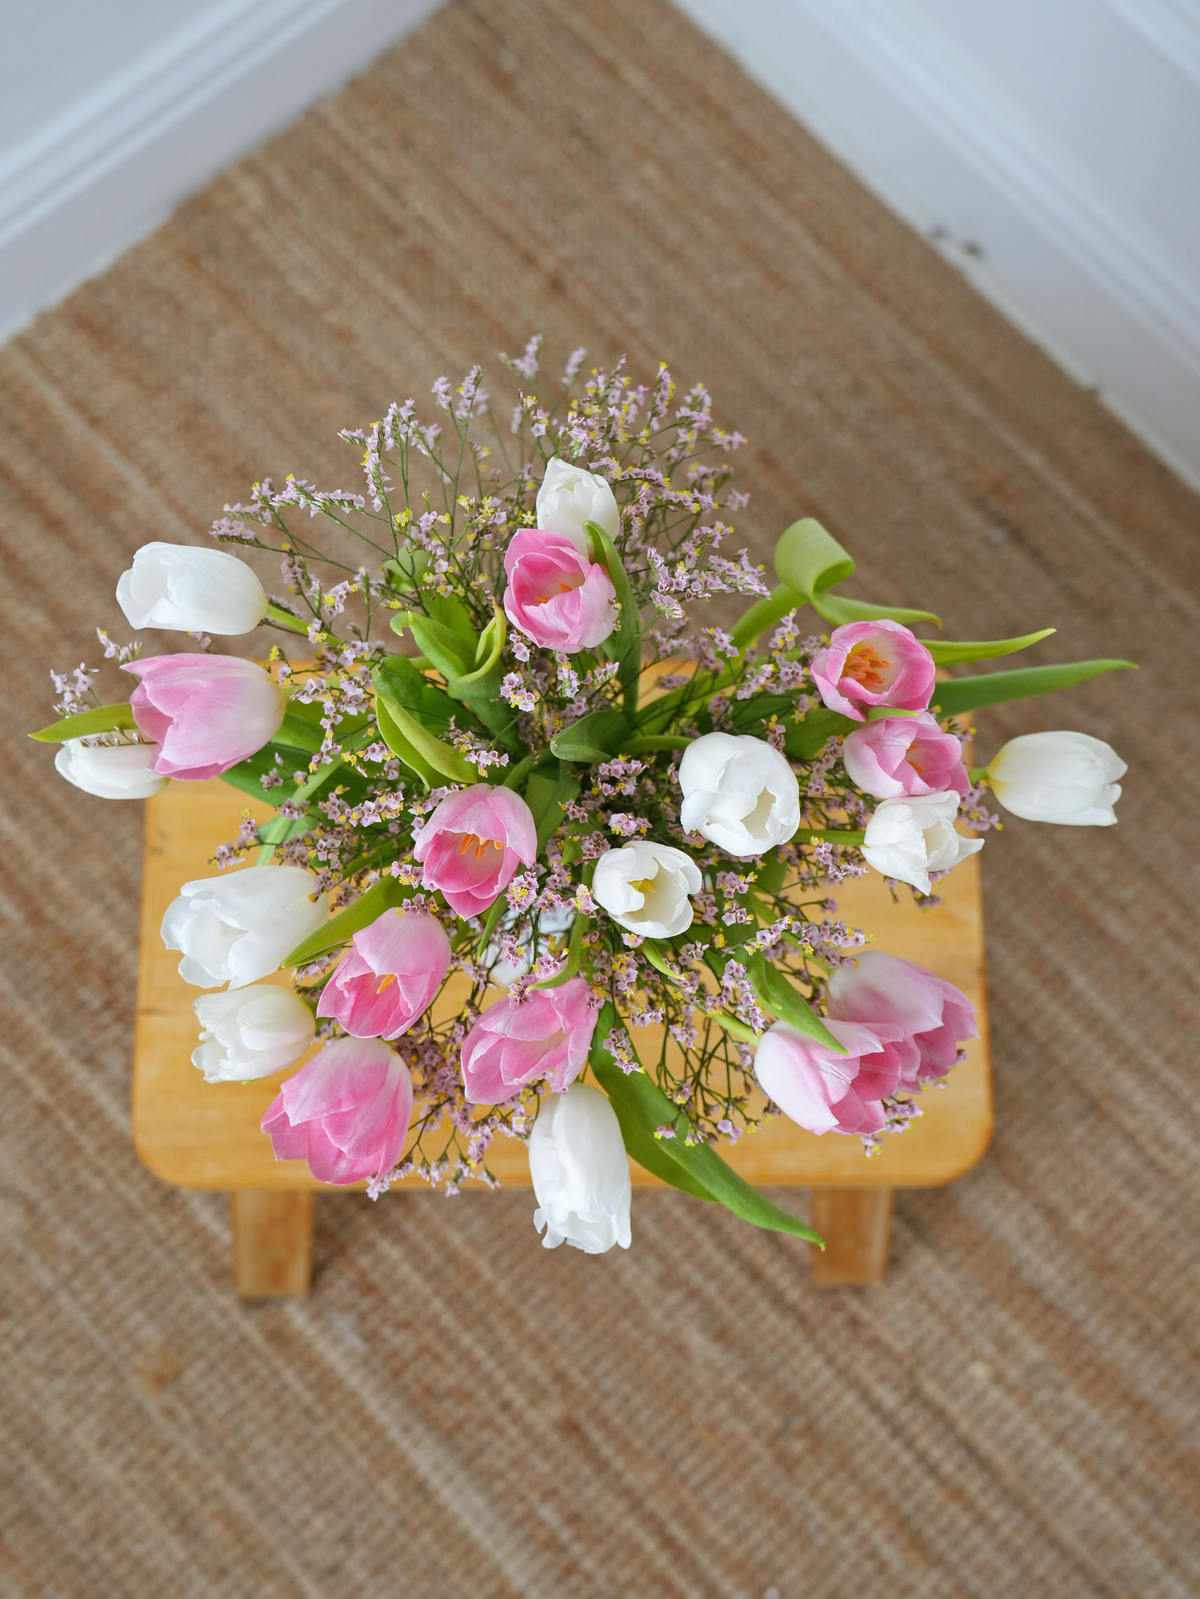 Mixed Tulips - Vase with Free Occasion Card